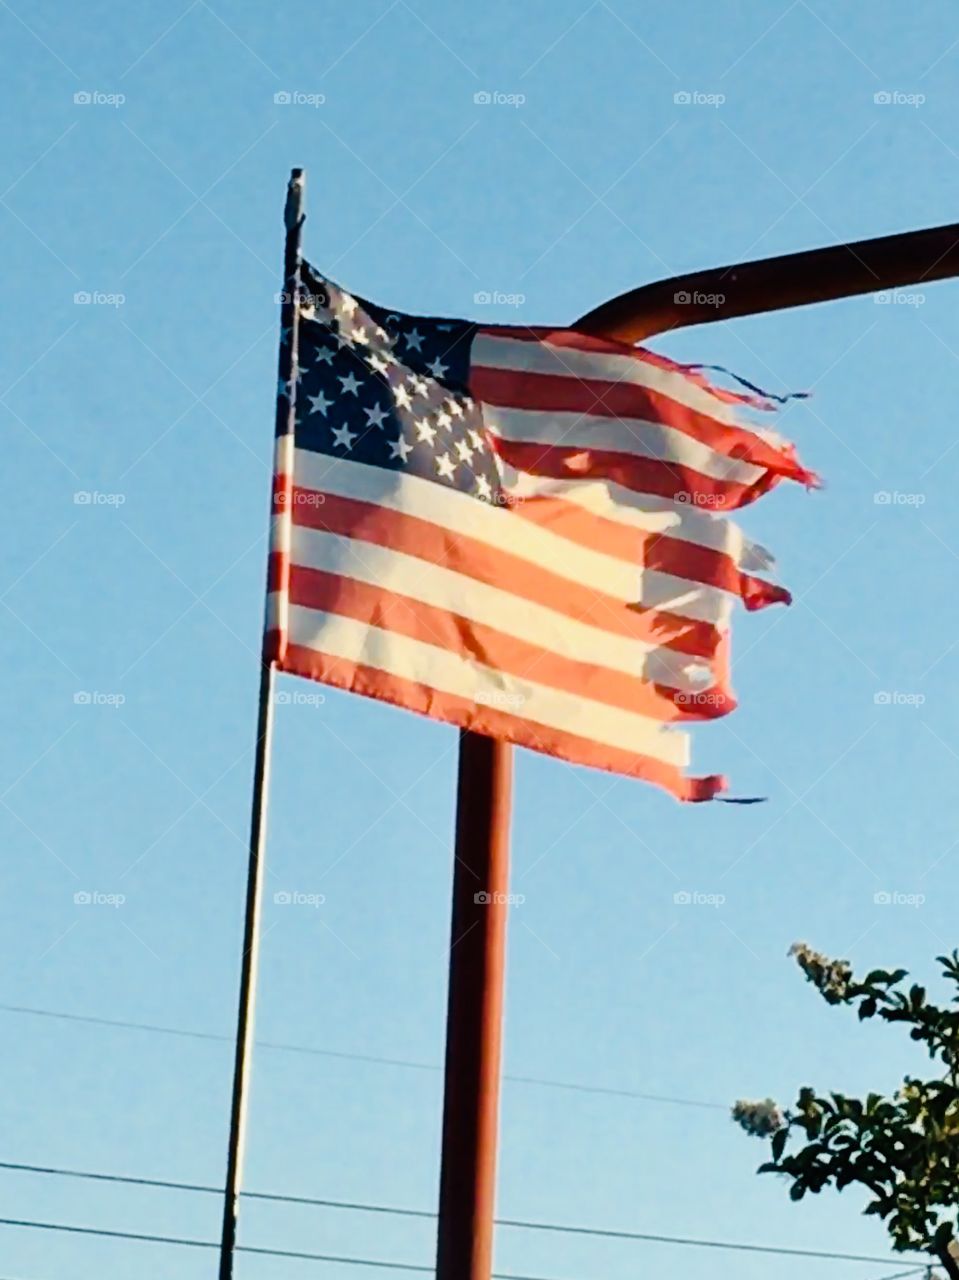 Tattered American flag blowing in the wind